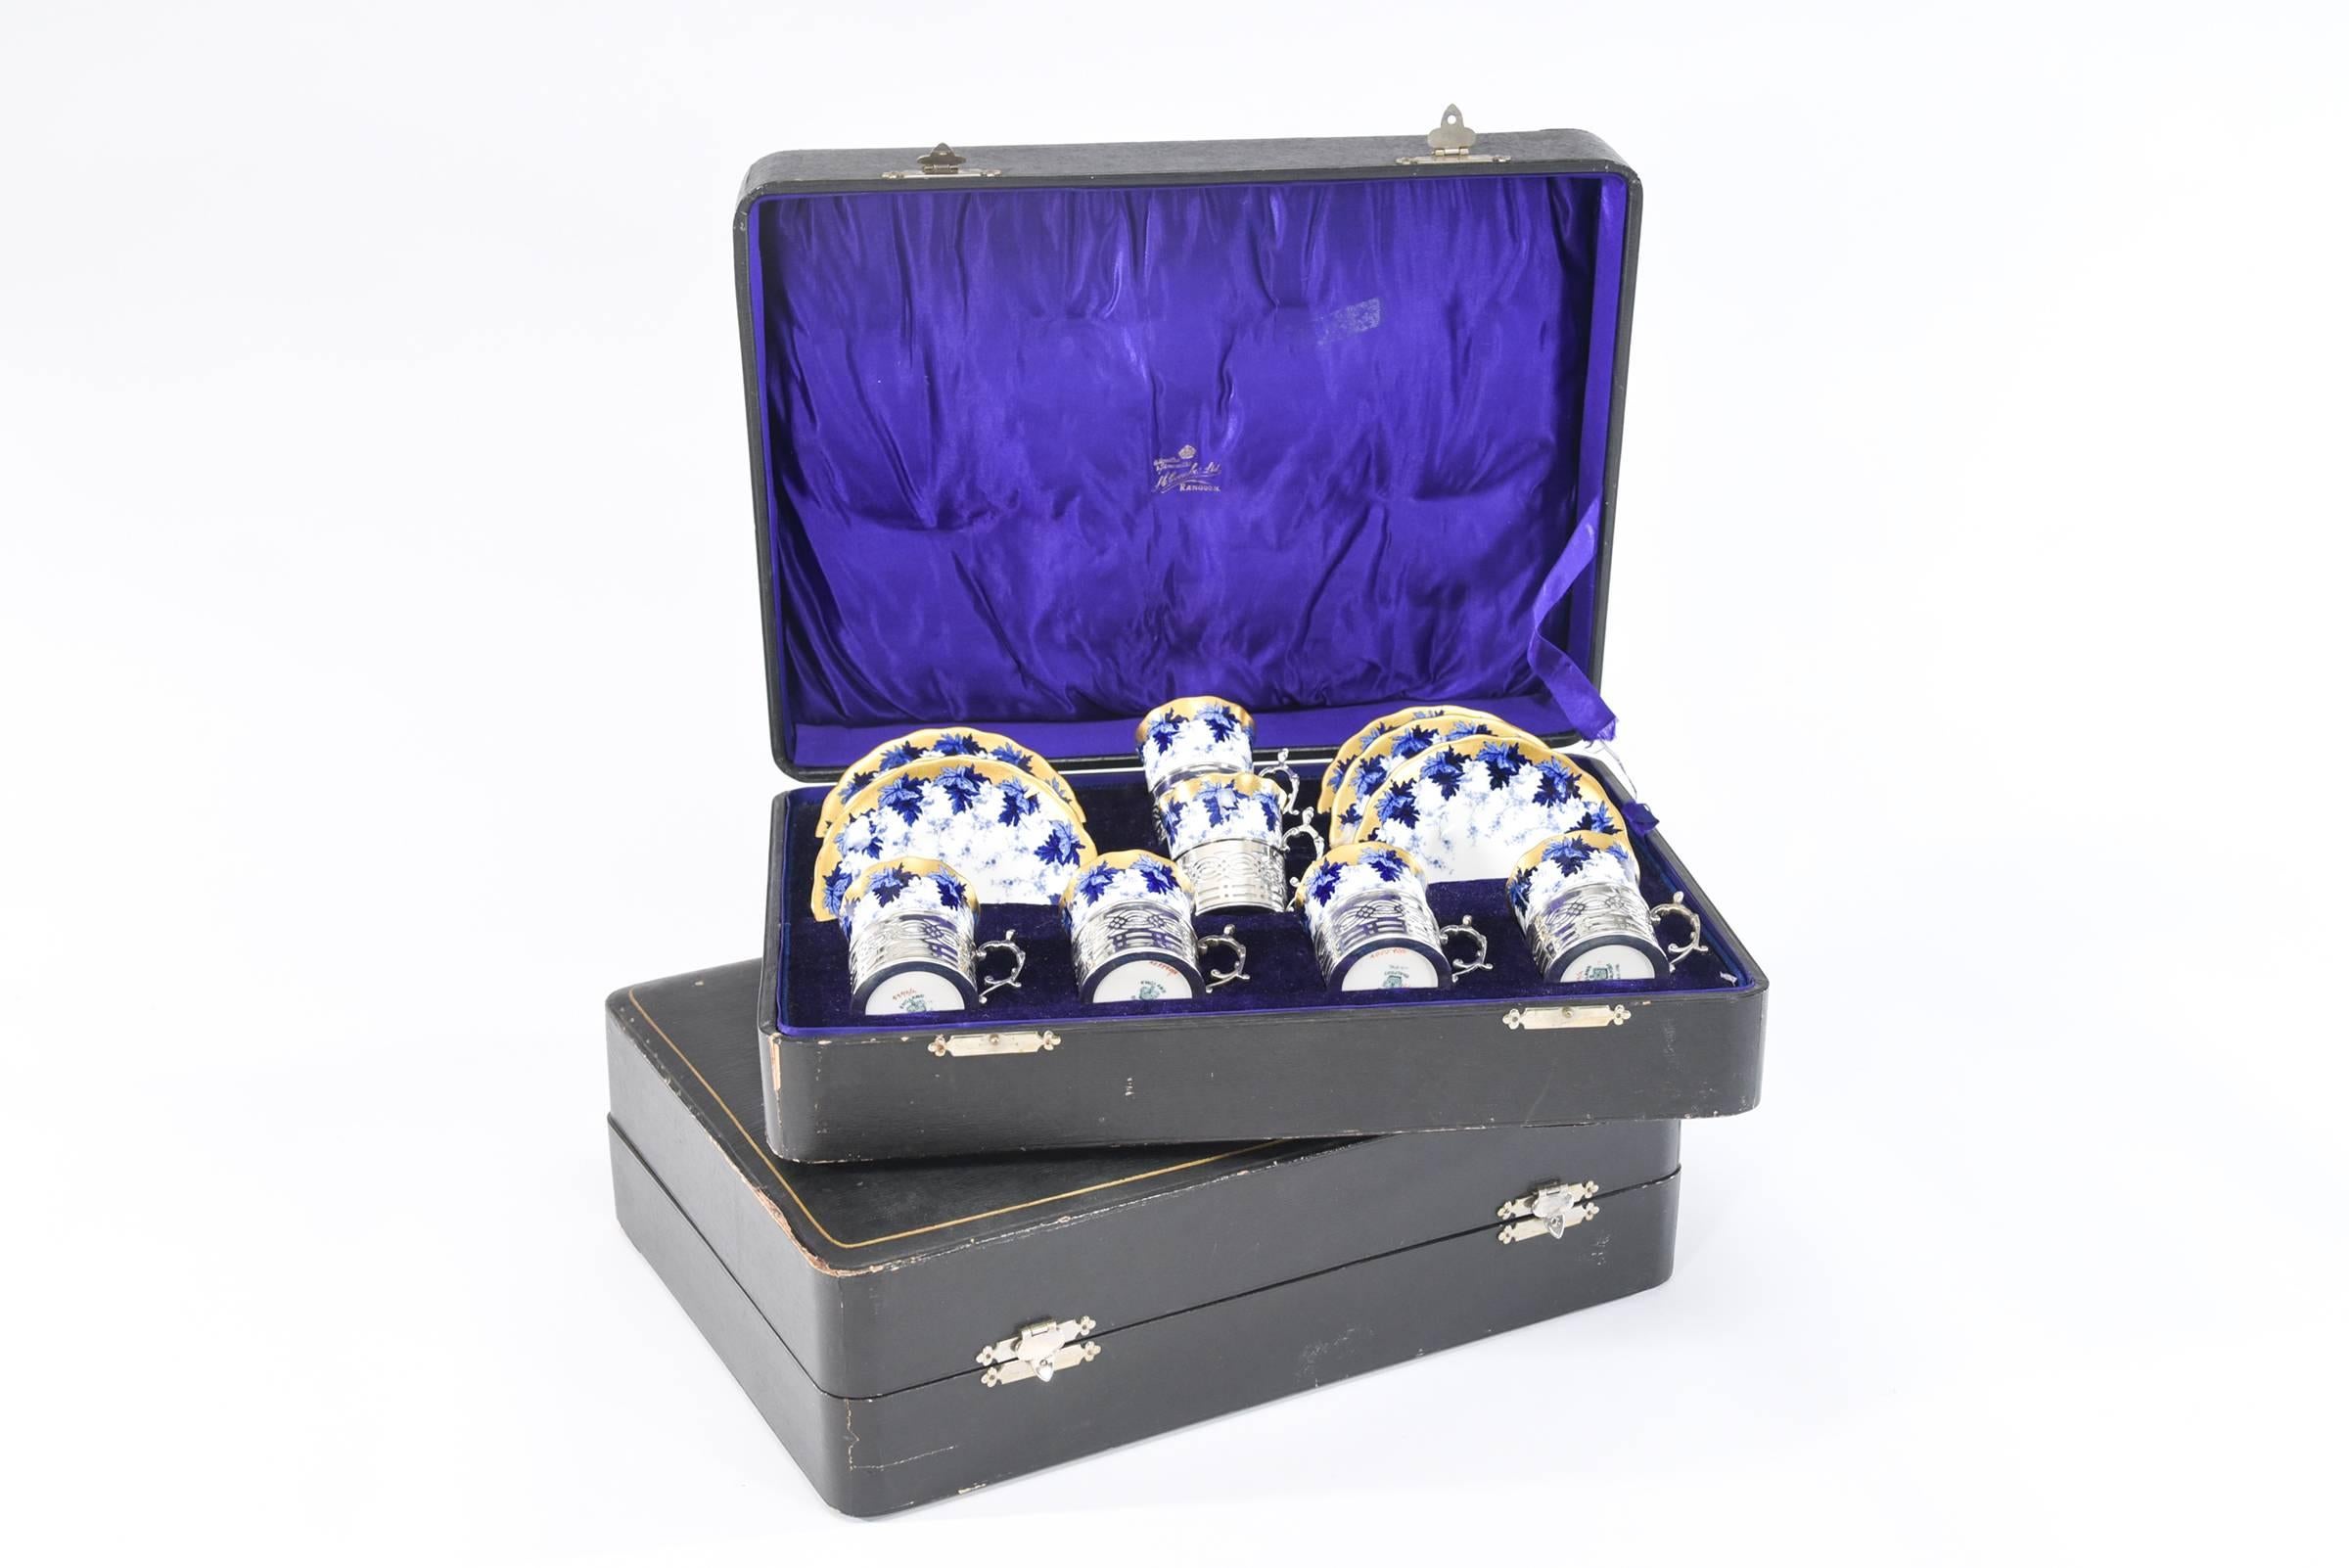 This set of 12 Coalport Espresso cups and saucers are presented in 2 original fitted boxes each holding 6. They were retailed by the Tiffany's of Rangoon, Burma! (now Myanmar), S. C. Coombe Ltd. The condition is excellent and the cups sit securely